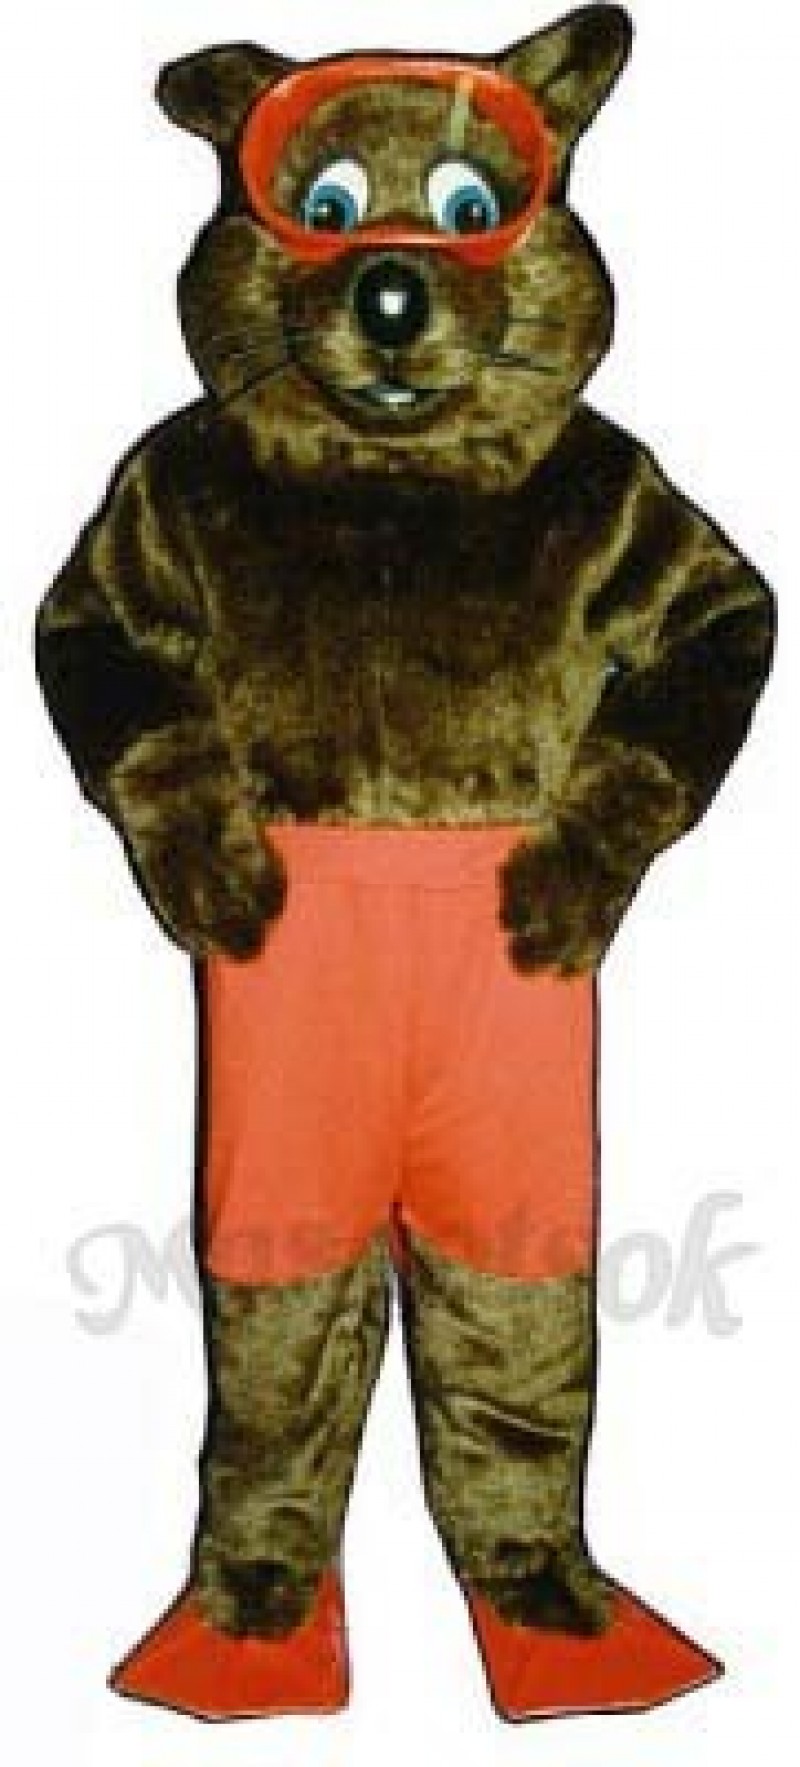 River Otter with Shorts, Fins & Goggles Mascot Costume